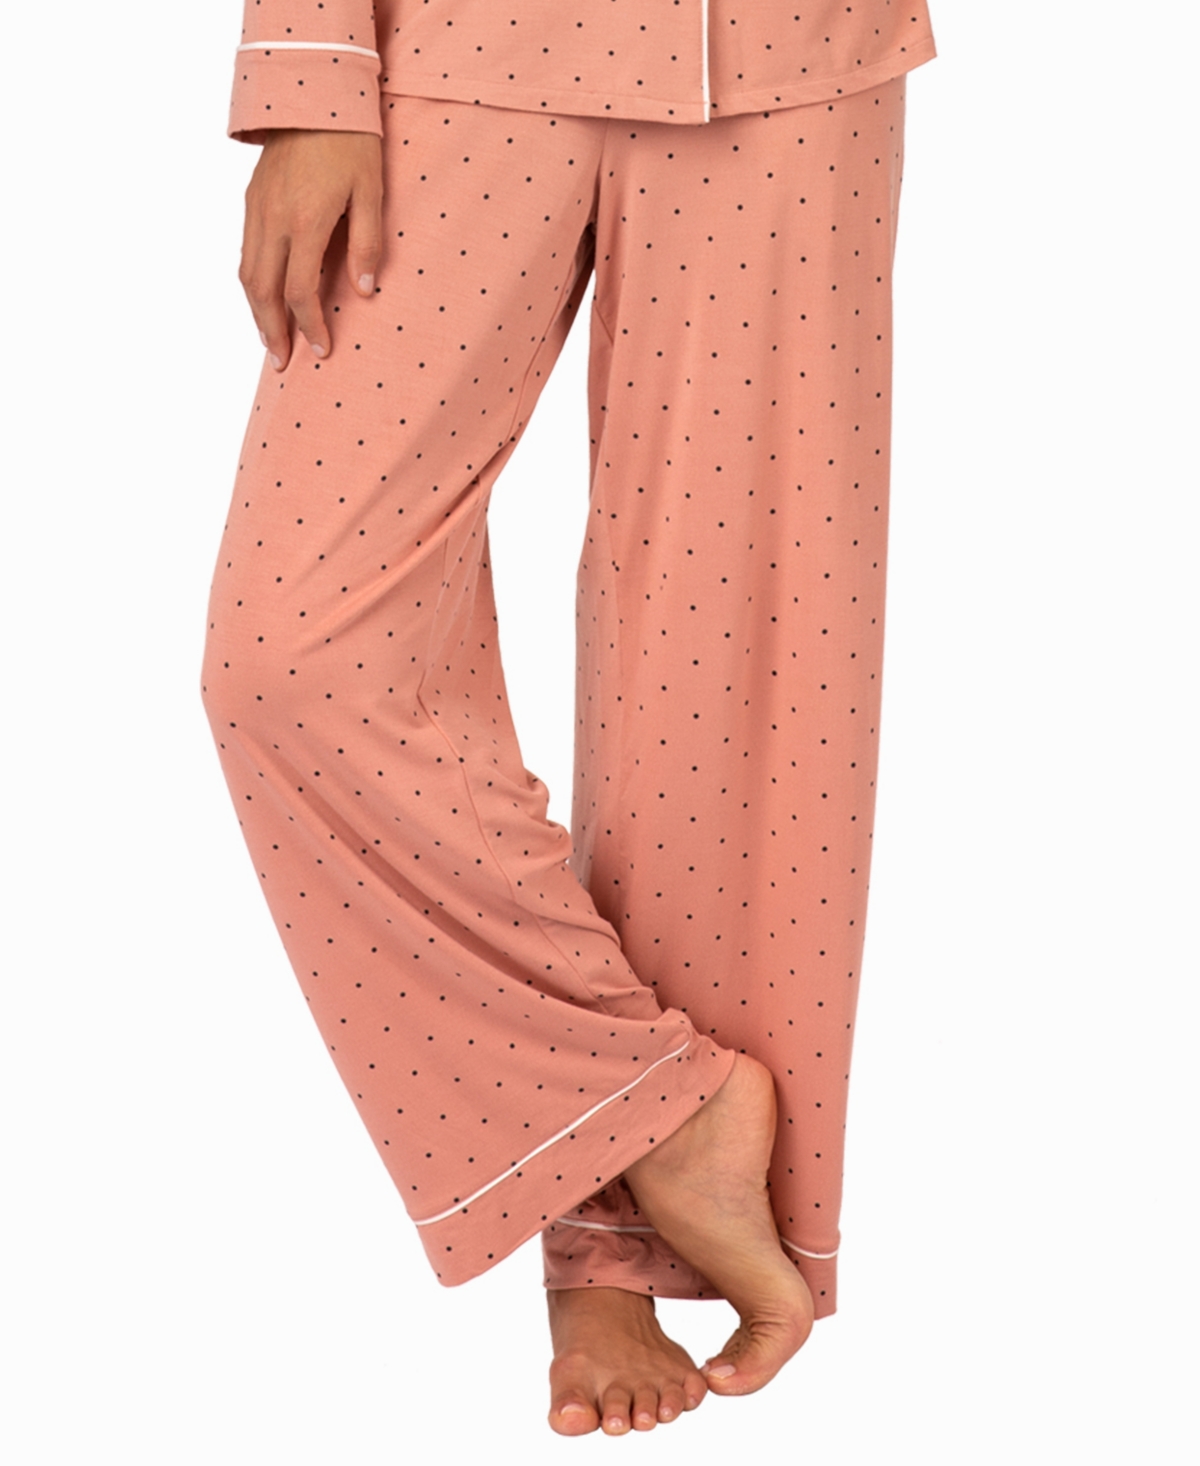 Women's The All-Day Lounge Print Pants - Pepper Dot, Shell Pink